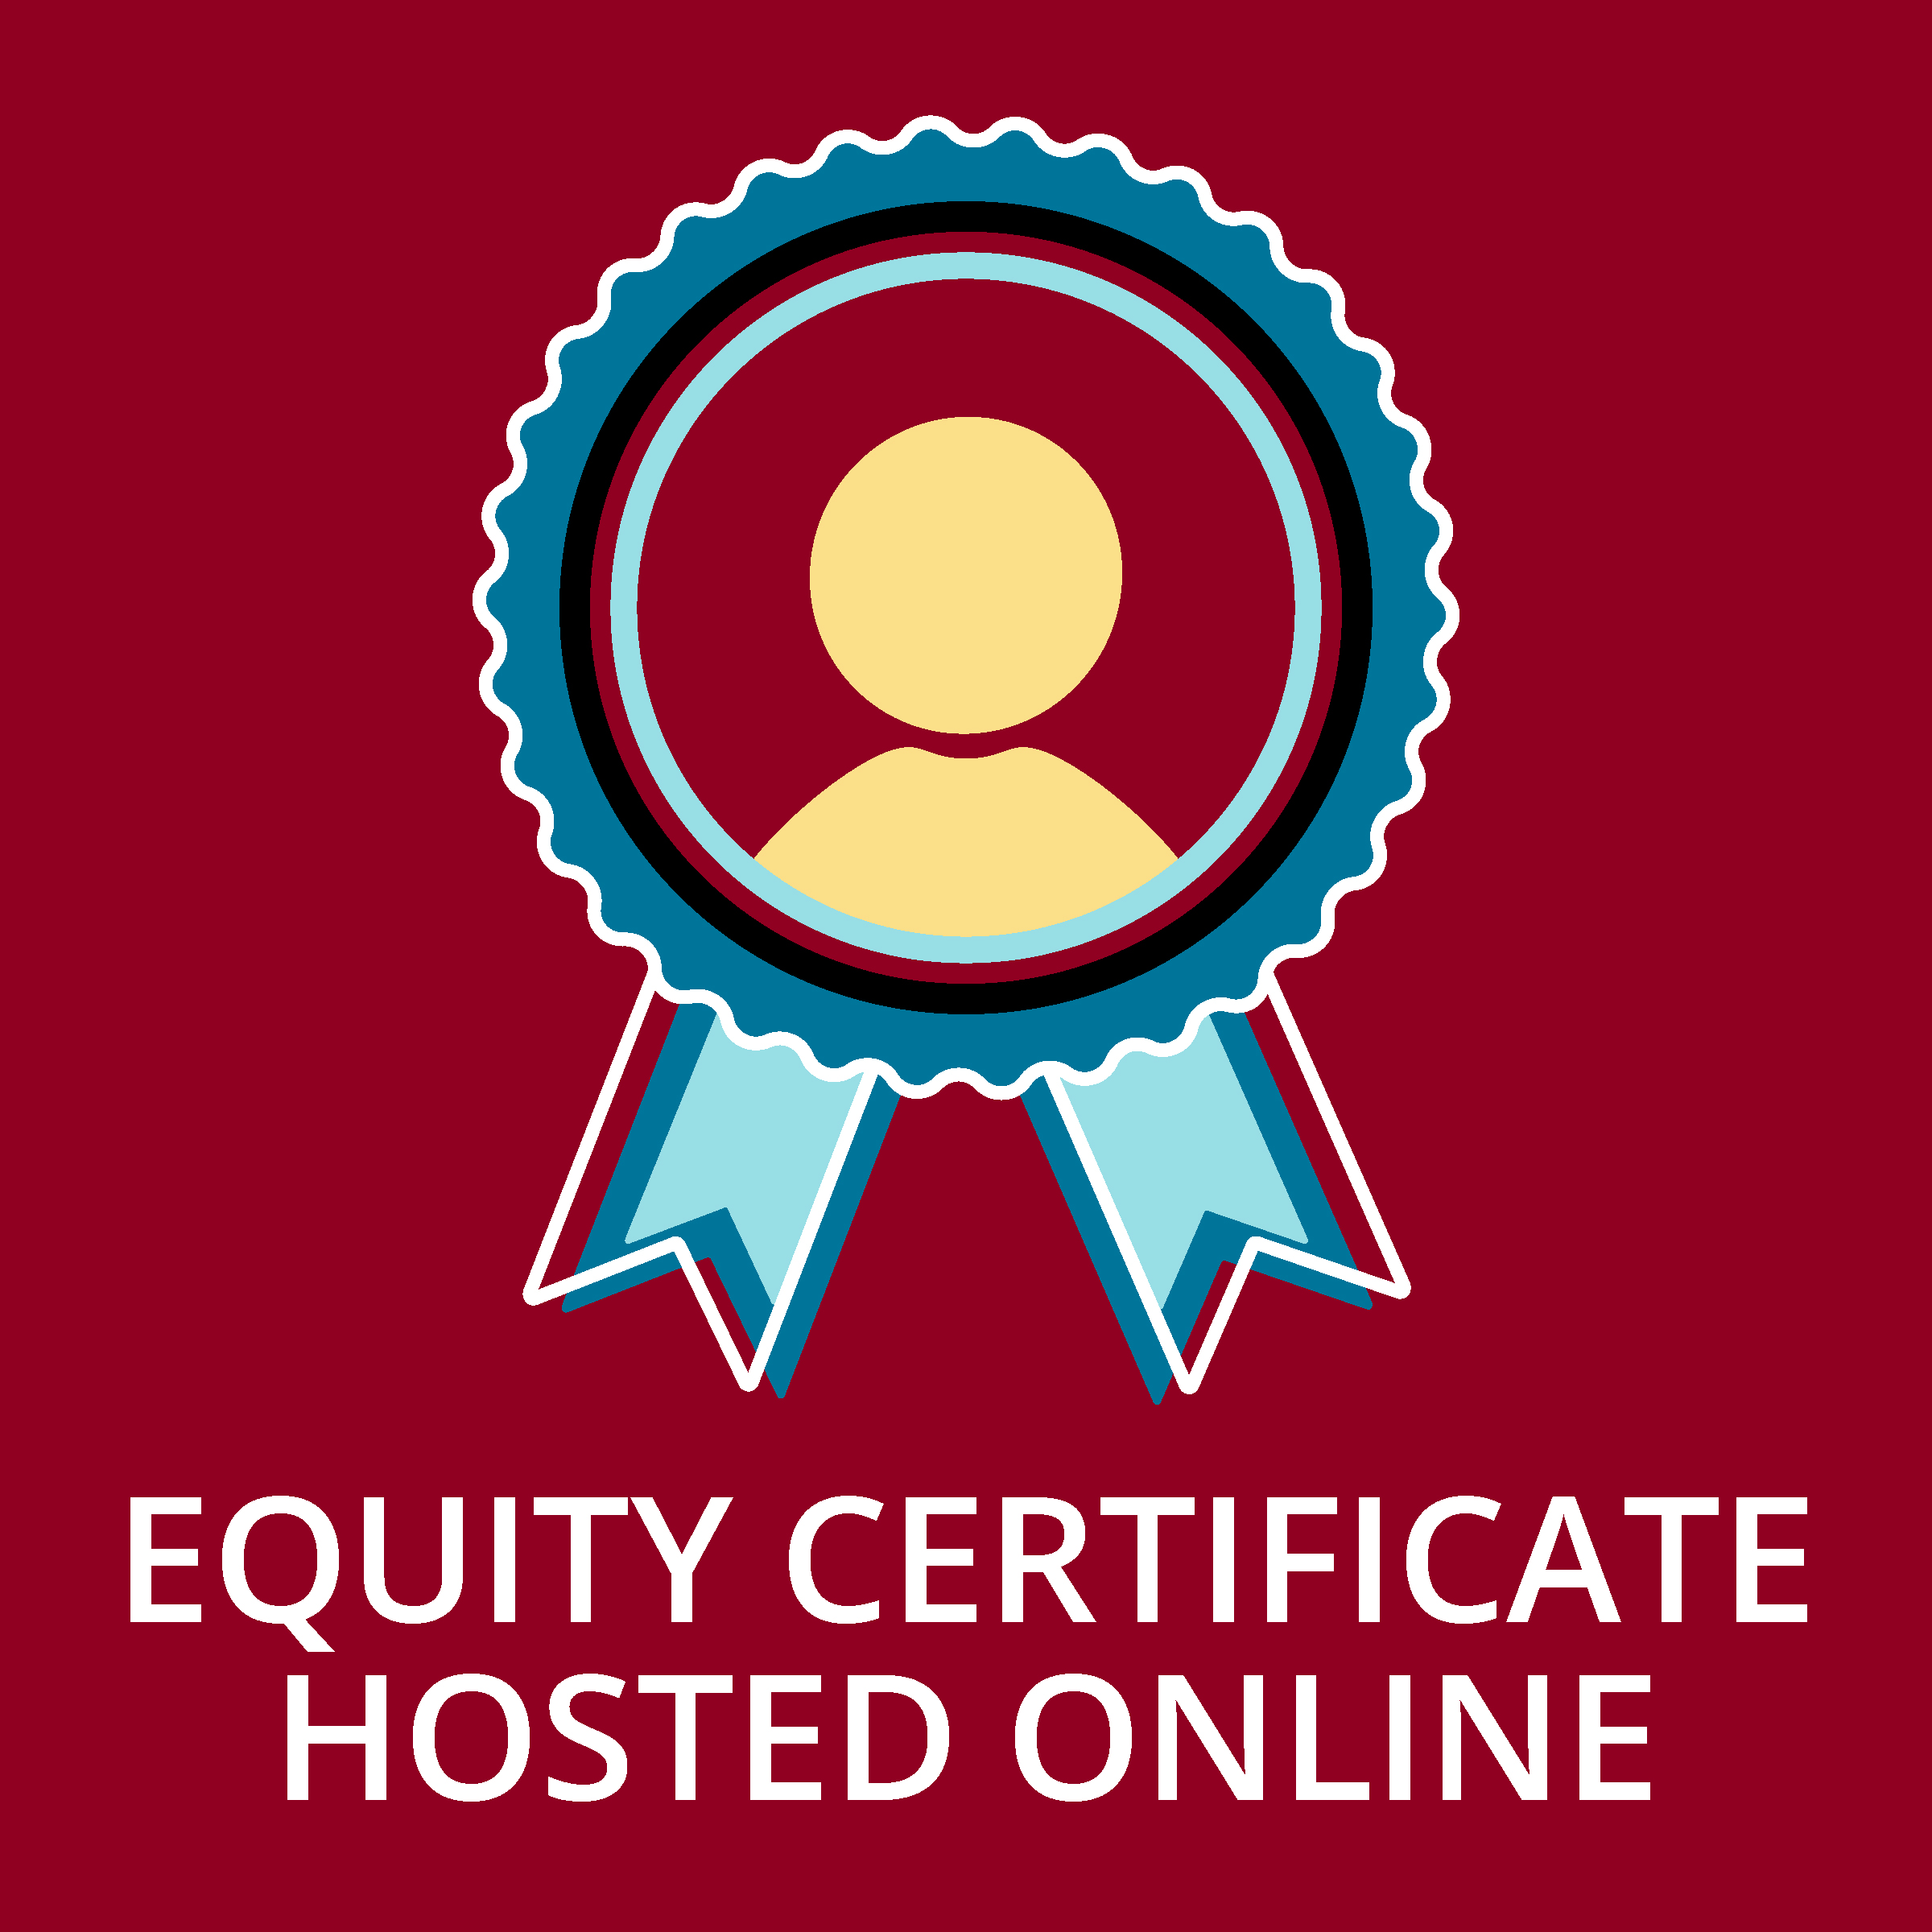 Click here for more information about the Equity Certificate Hosted Online